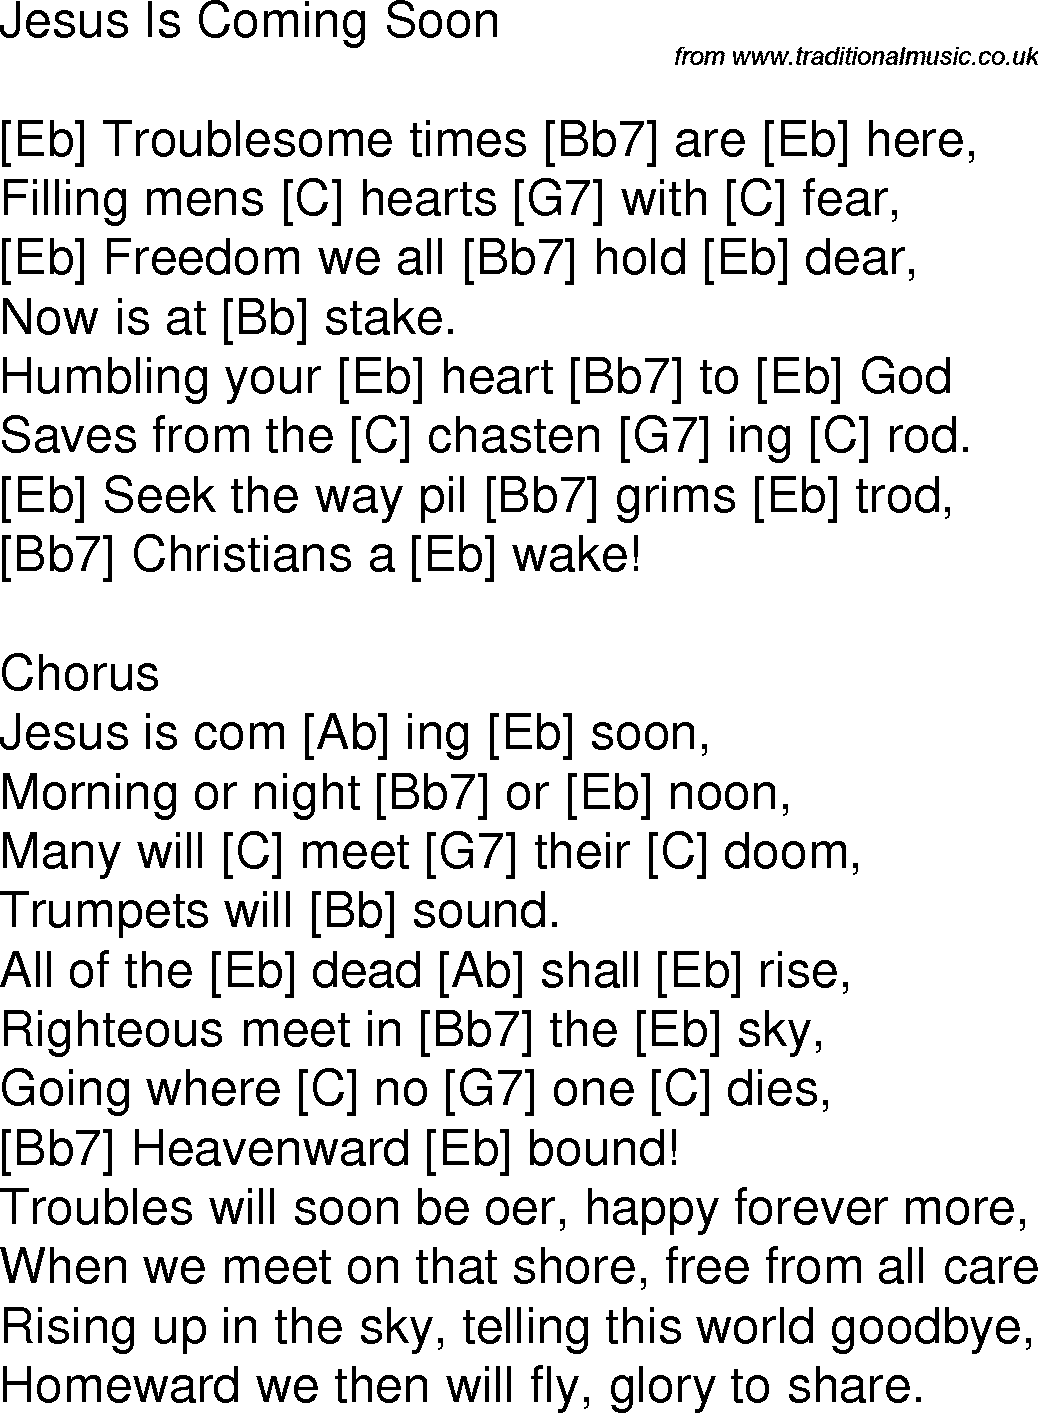 Old time song lyrics with chords for Jesus Is Coming Soon